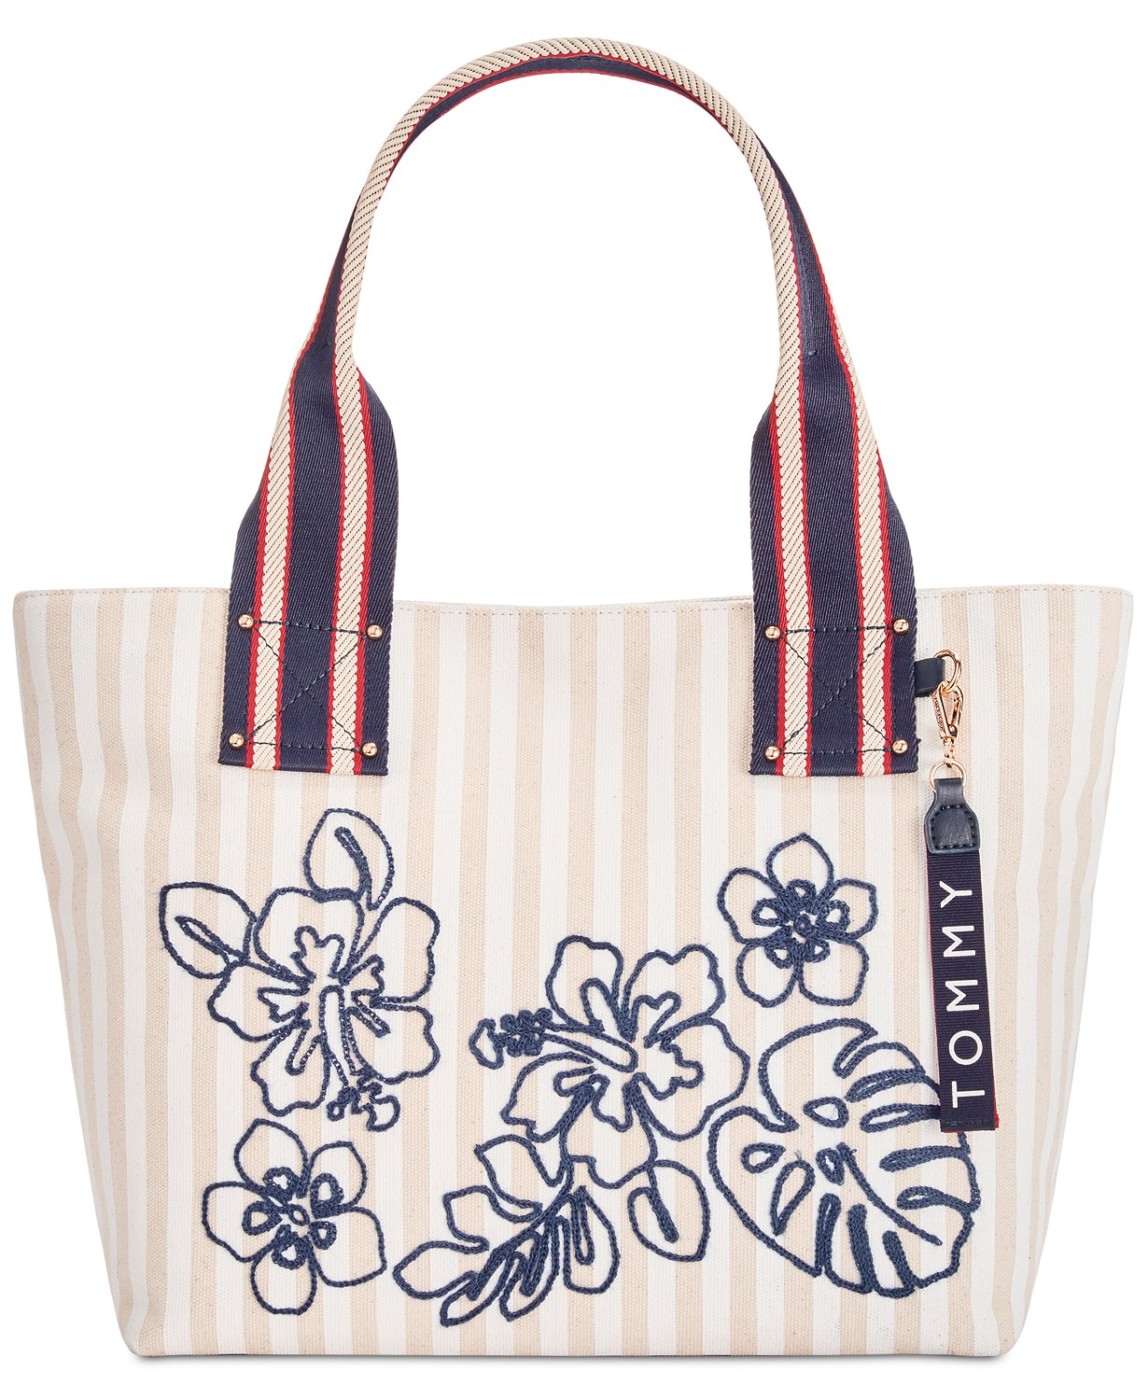 woocommerce-673321-2209615.cloudwaysapps.com-tommy-hilfiger-womens-classic-tommy-floral-tote-bag